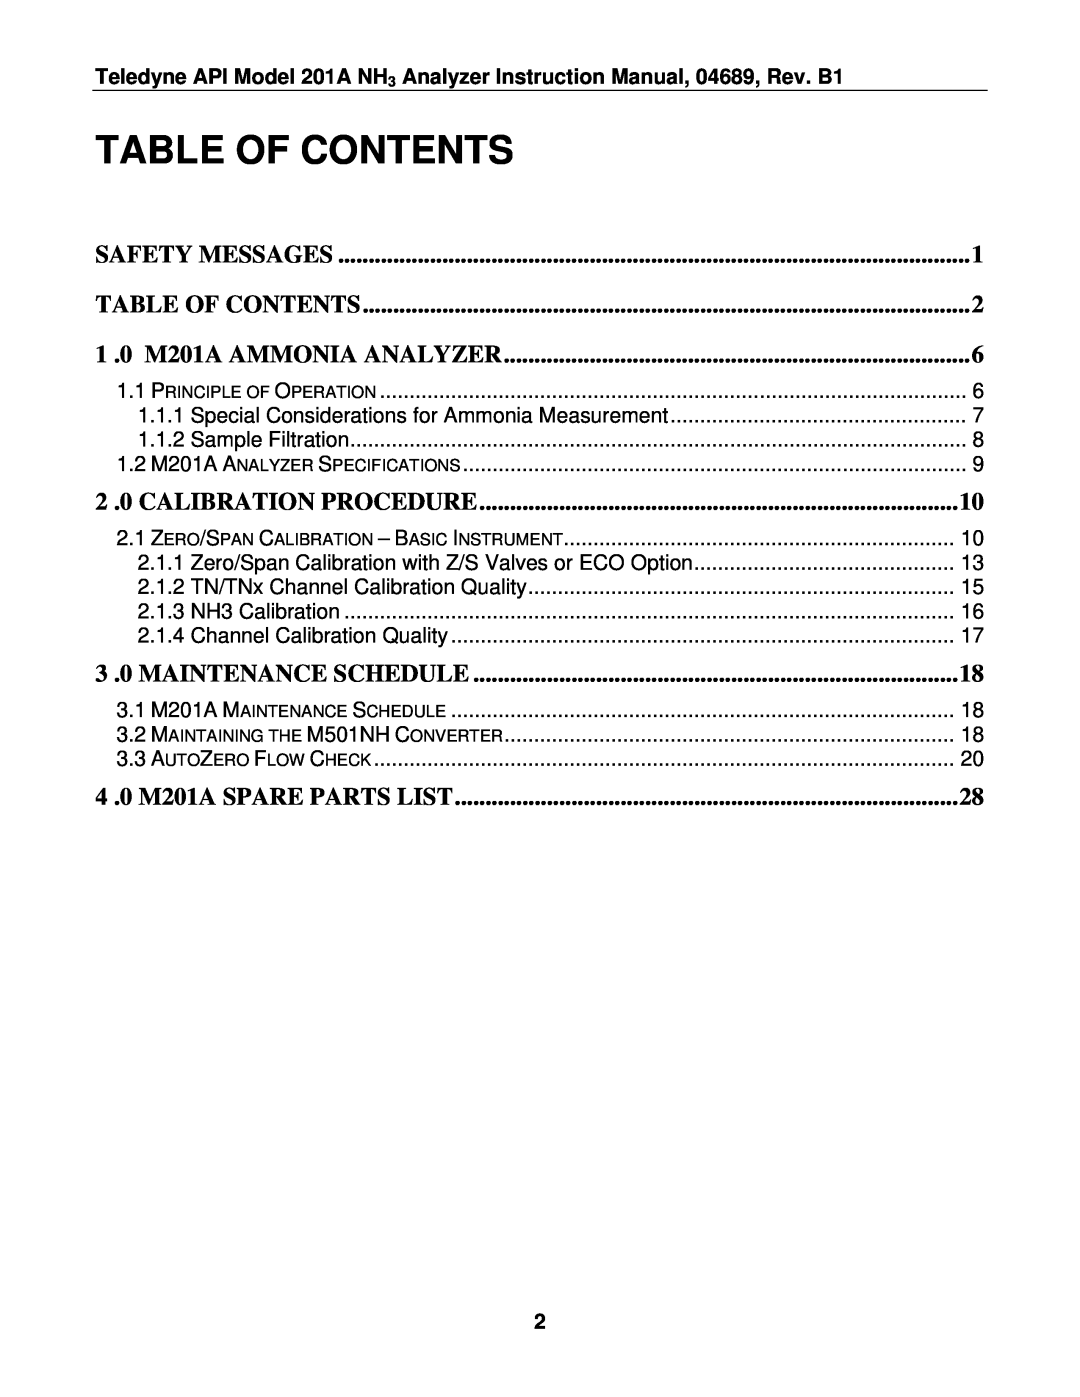 Teledyne Table Of Contents, Safety Messages, 0 M201A AMMONIA ANALYZER, Calibration Procedure, Maintenance Schedule 